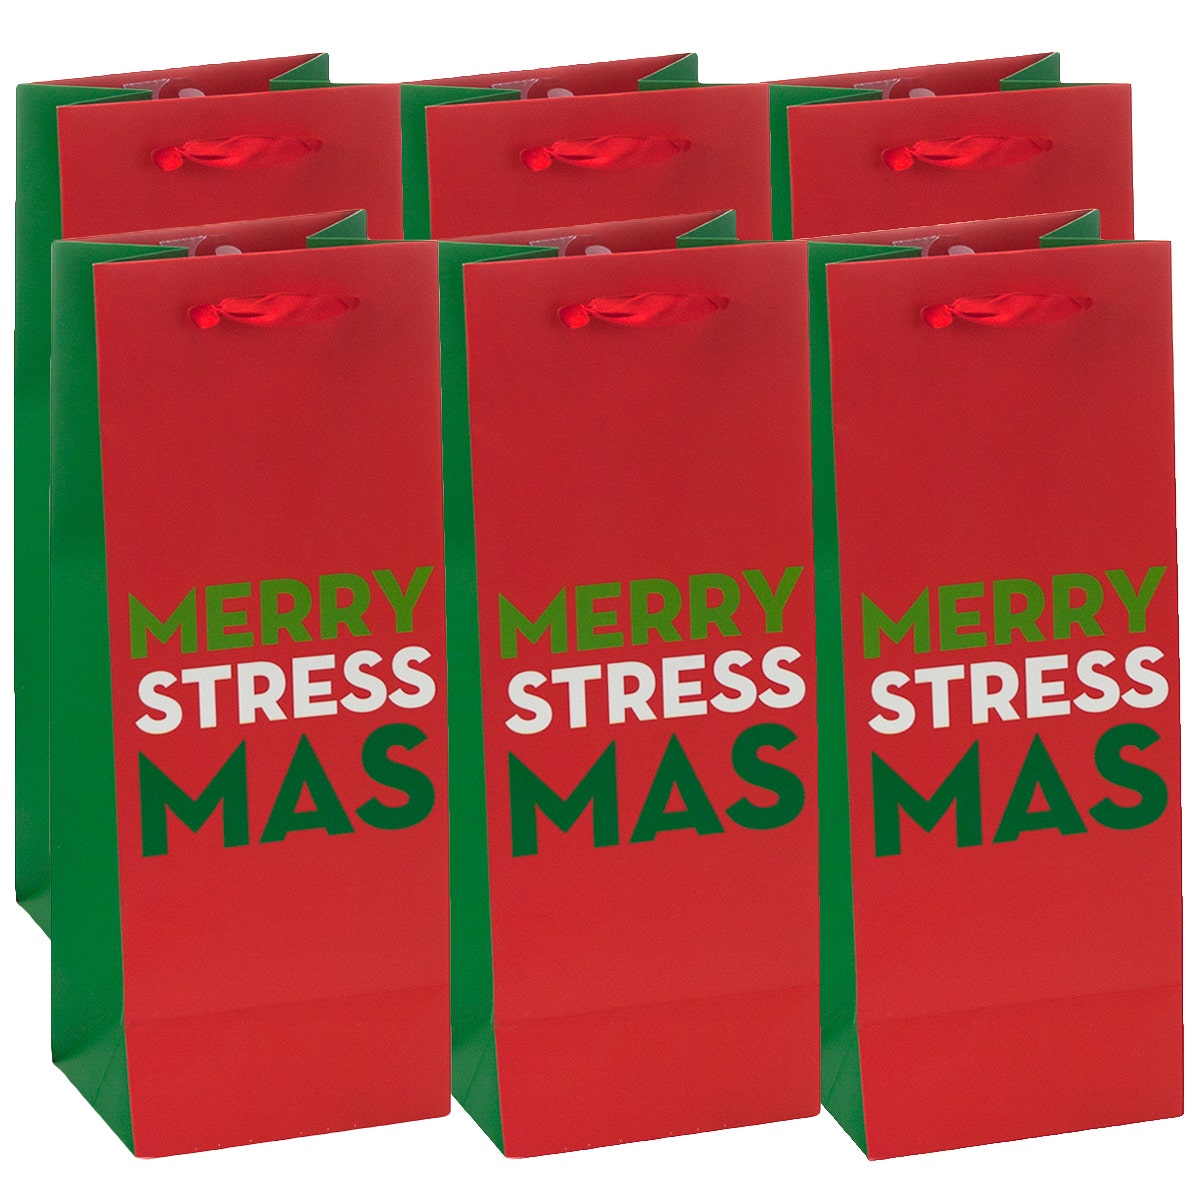 6 Wine Gift Bags: “Merry Christmas Y’all” Or “Merry Stressmas”